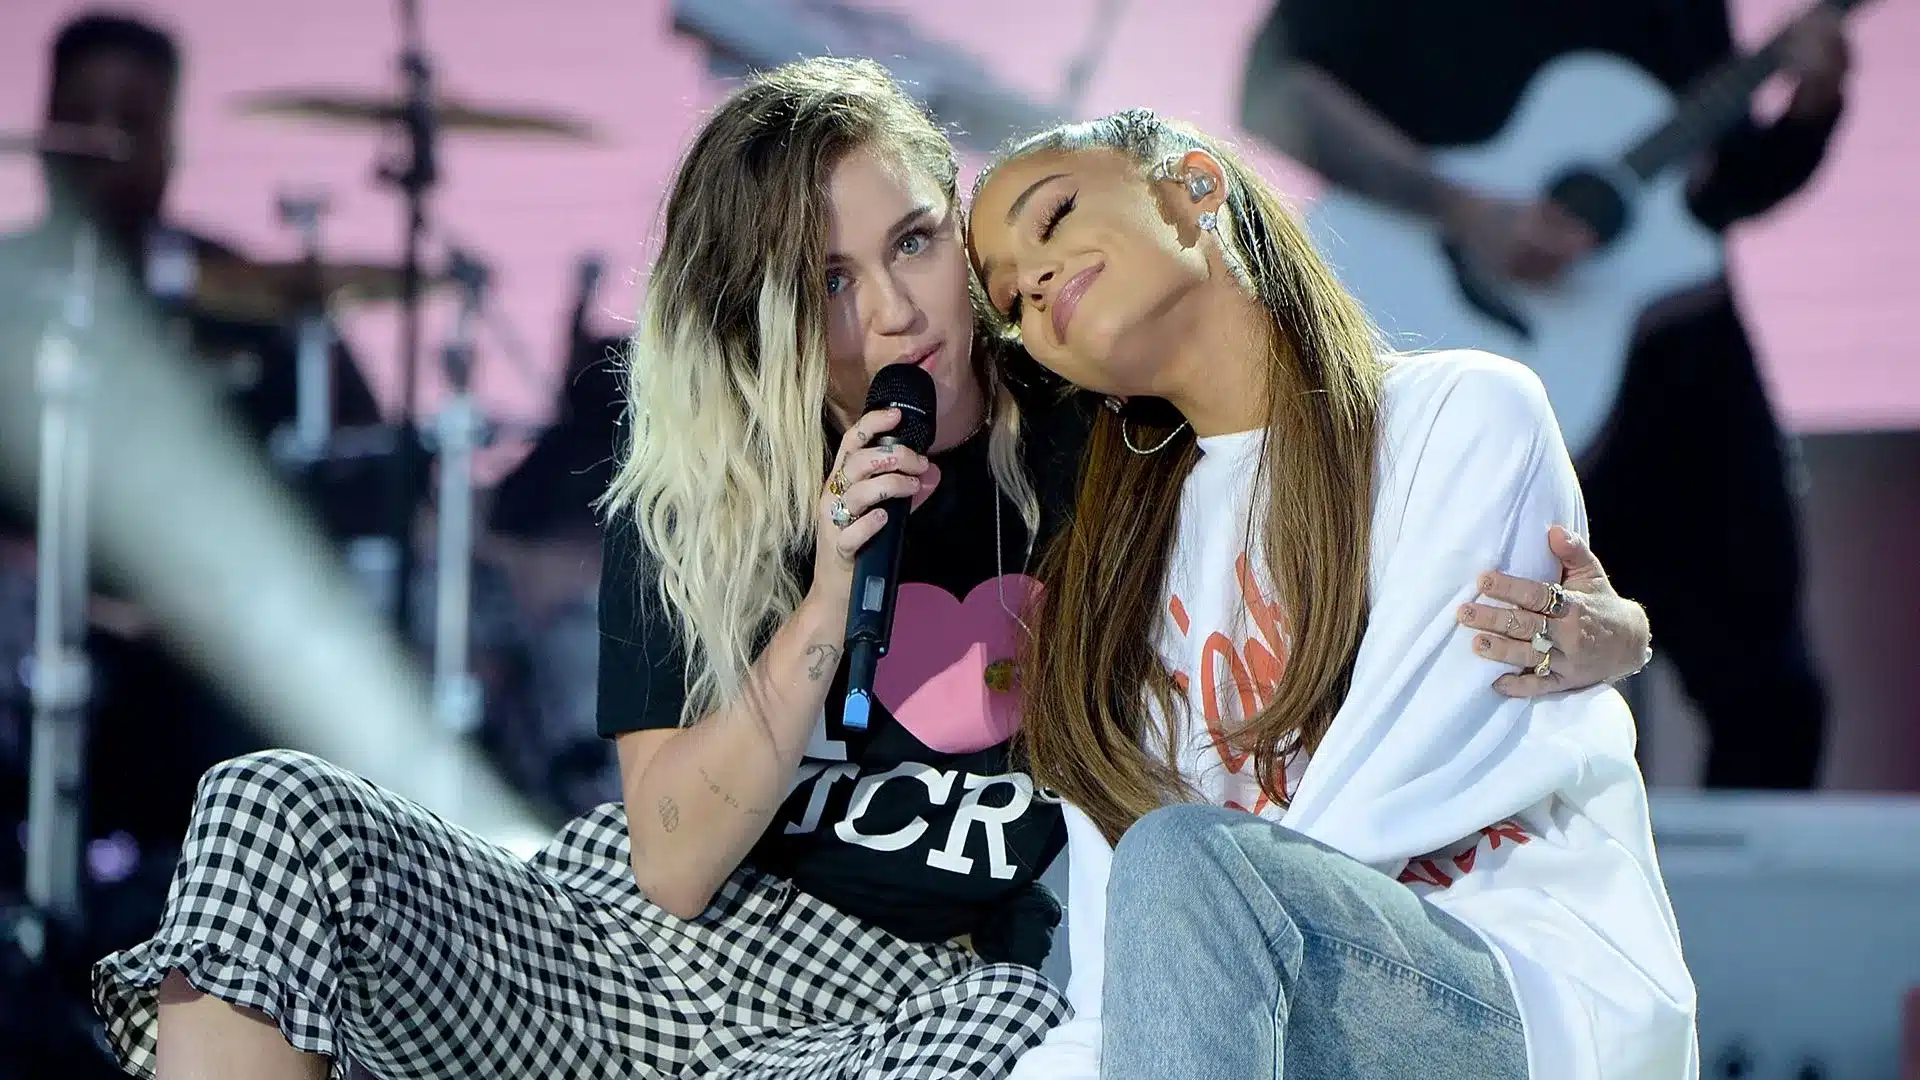 Miley Cyrus Shares Her Feelings About Ariana Grande Friendship